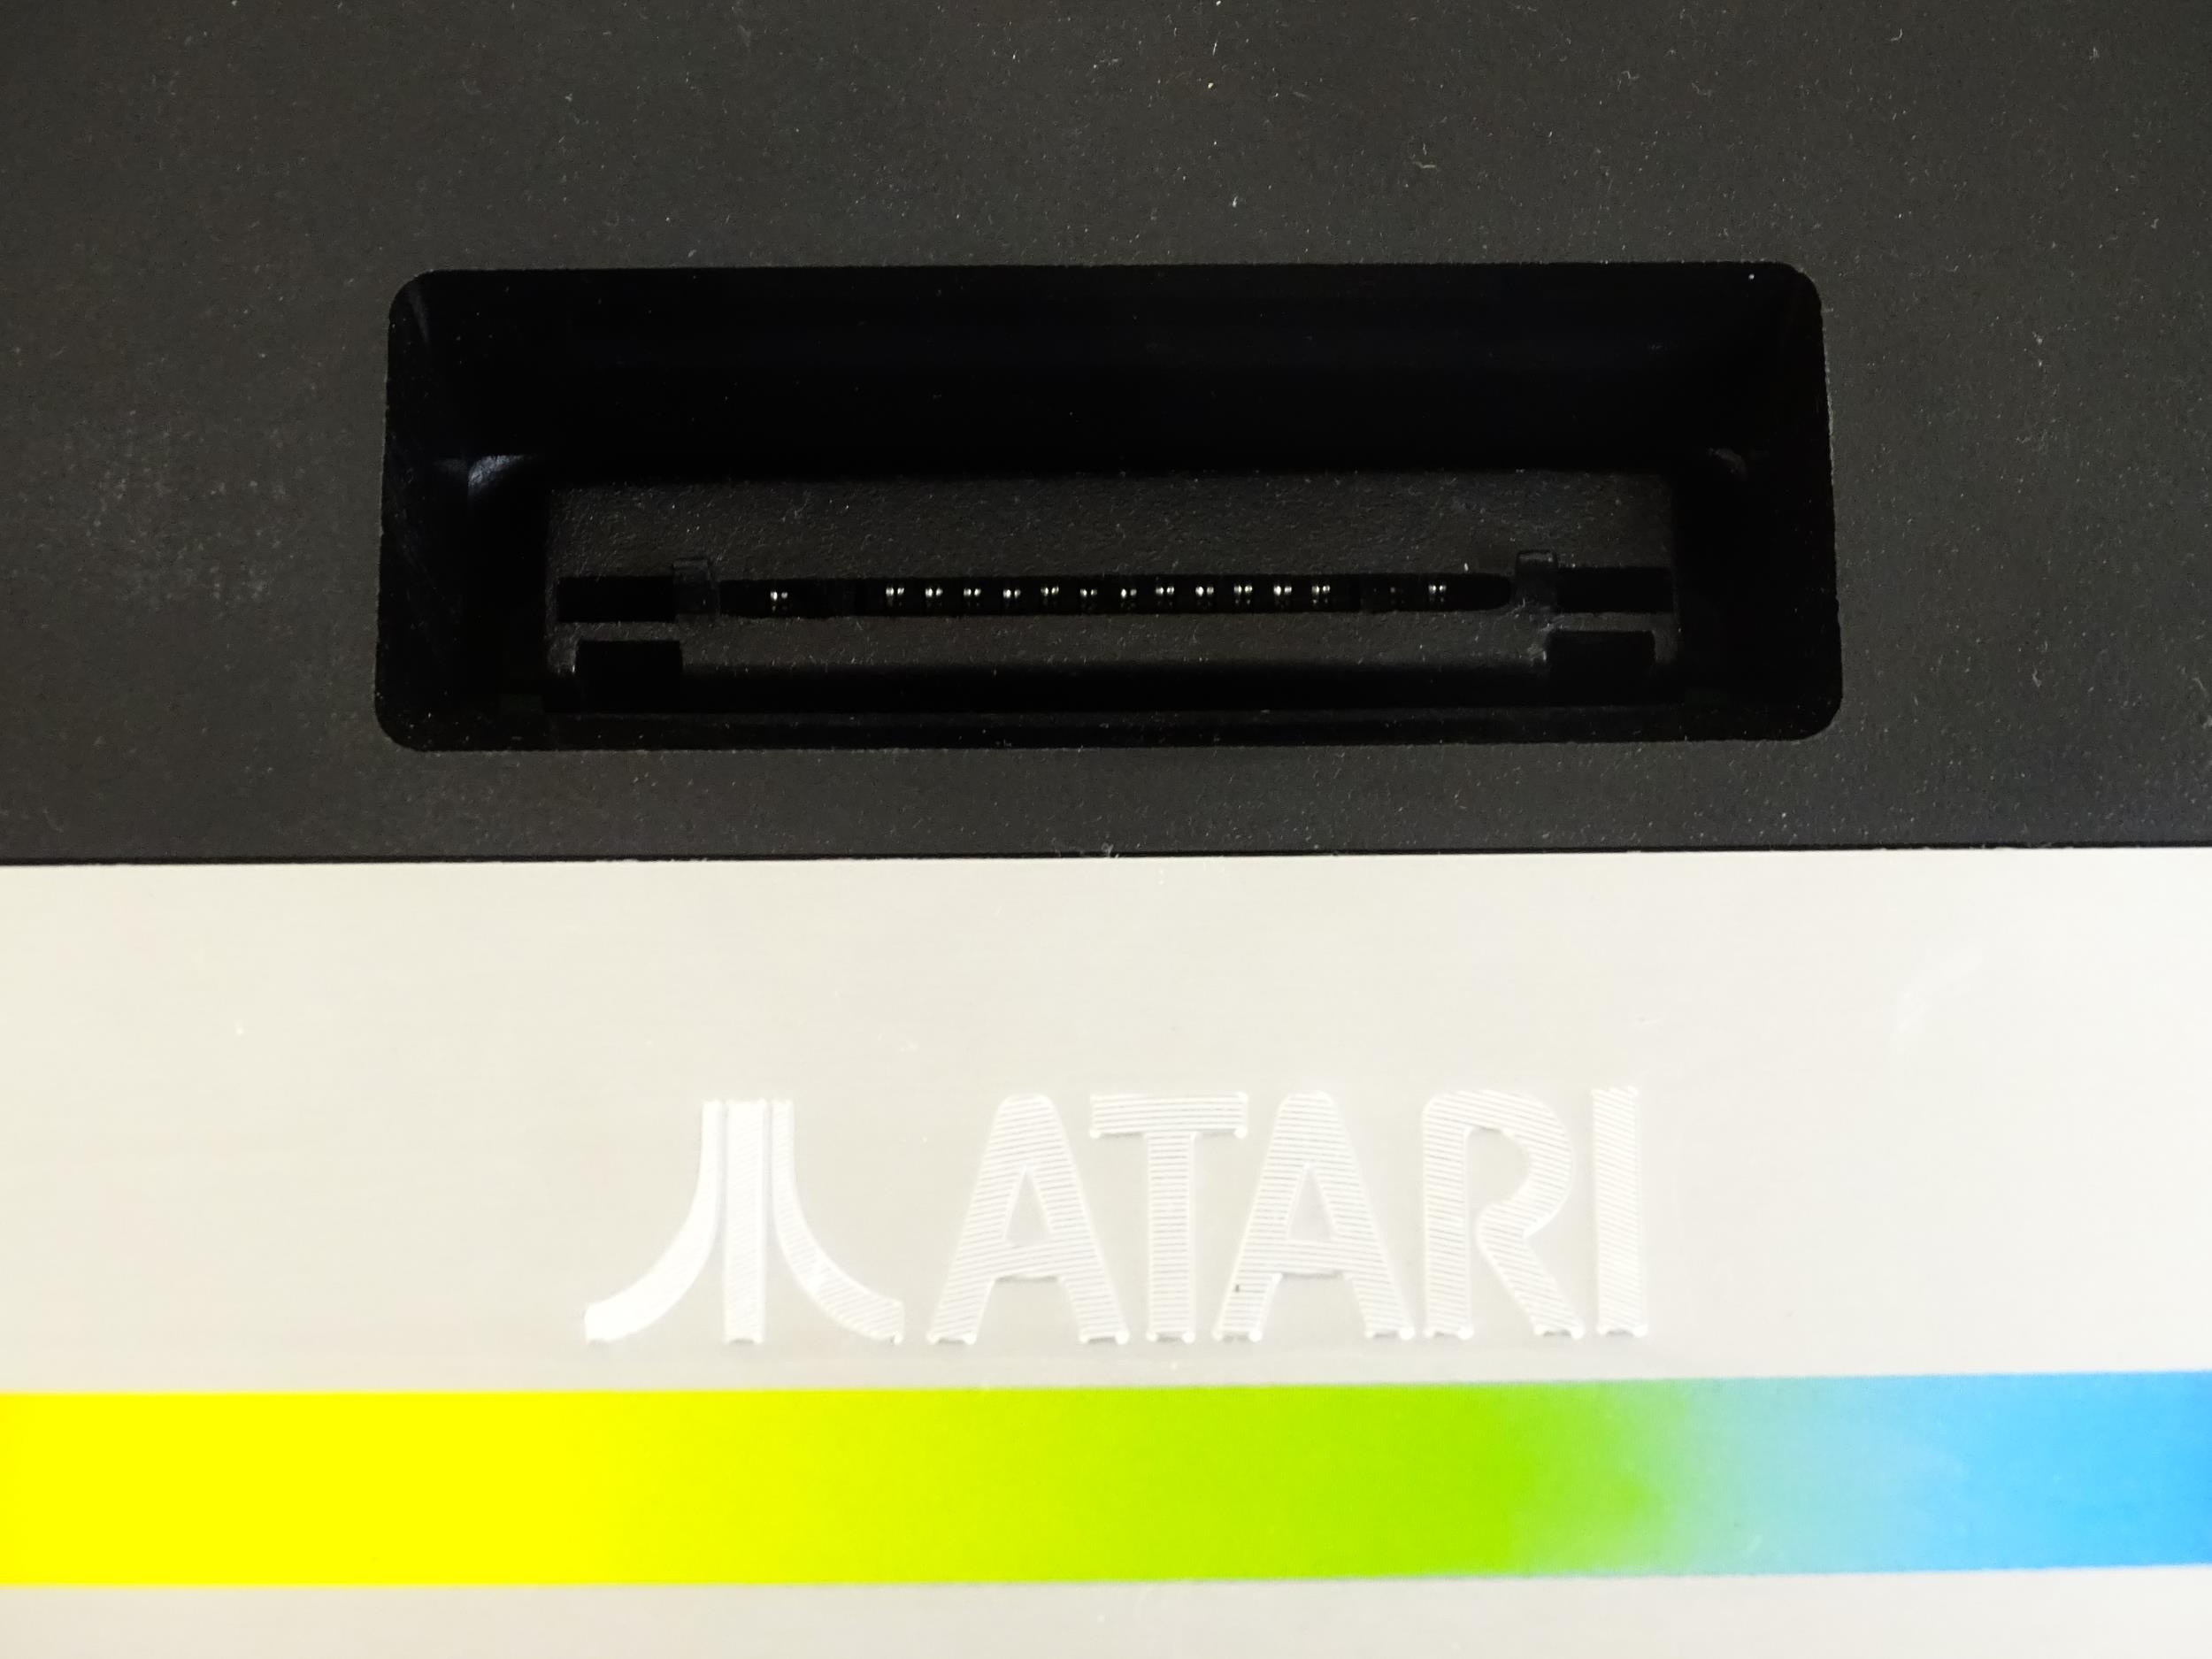 Toys: An Atari 7800 video game console. Together with games cartridges comprising Jinks, Xevious, - Image 6 of 10